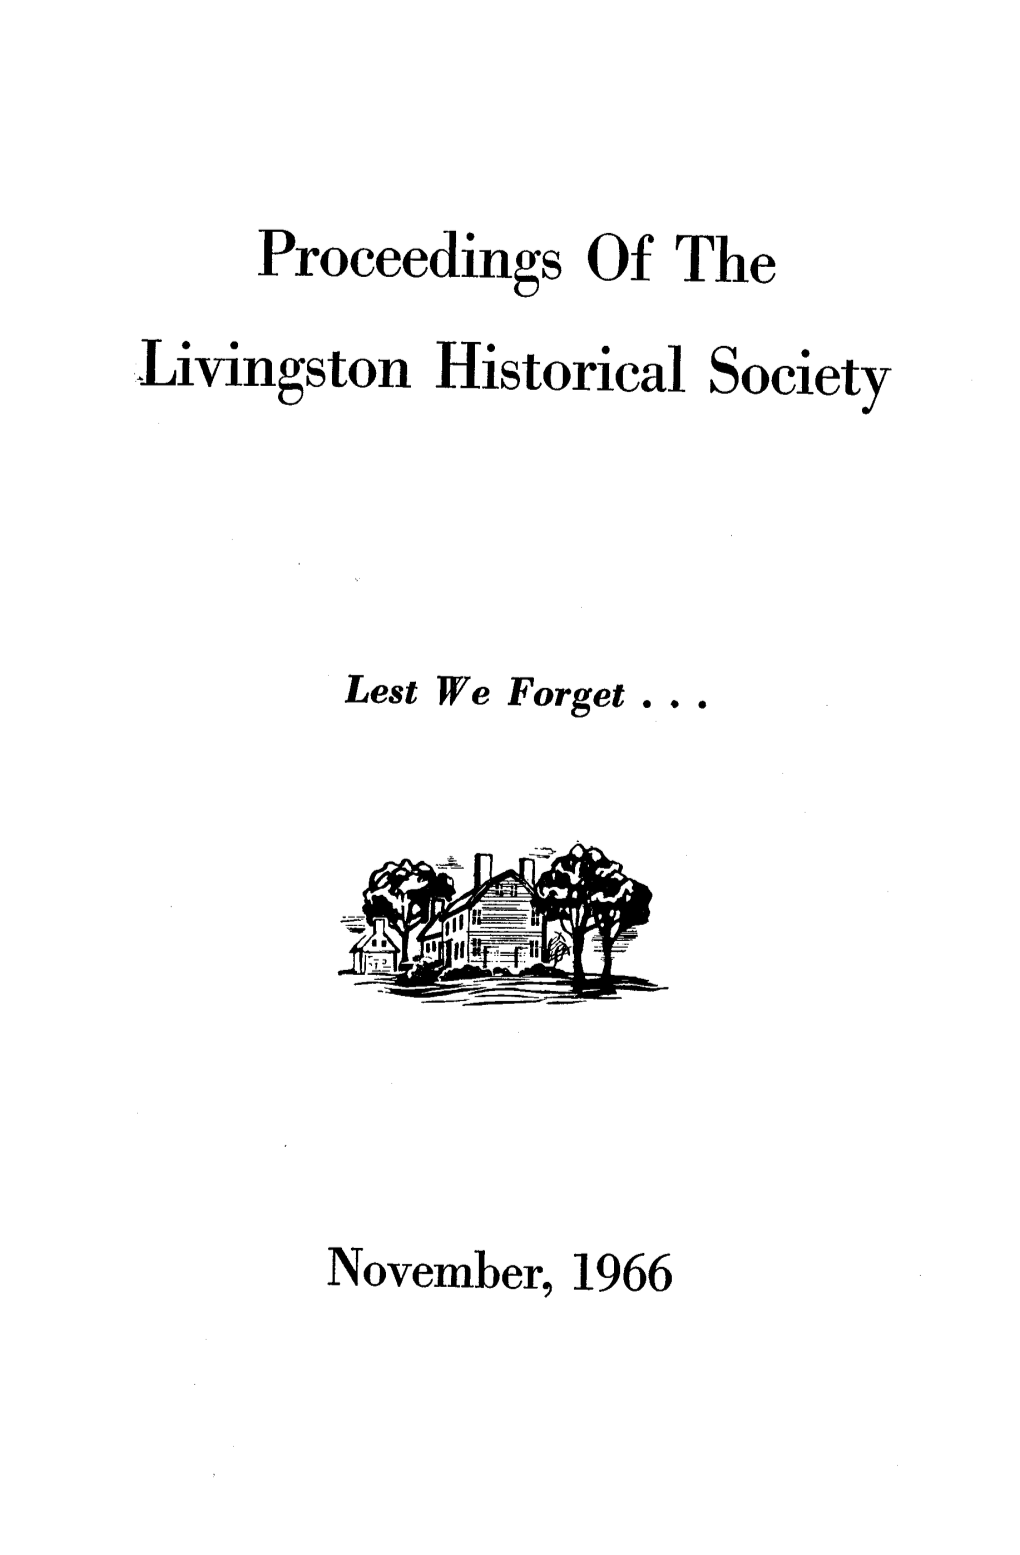 Proceedings of the Livingston Historical Society